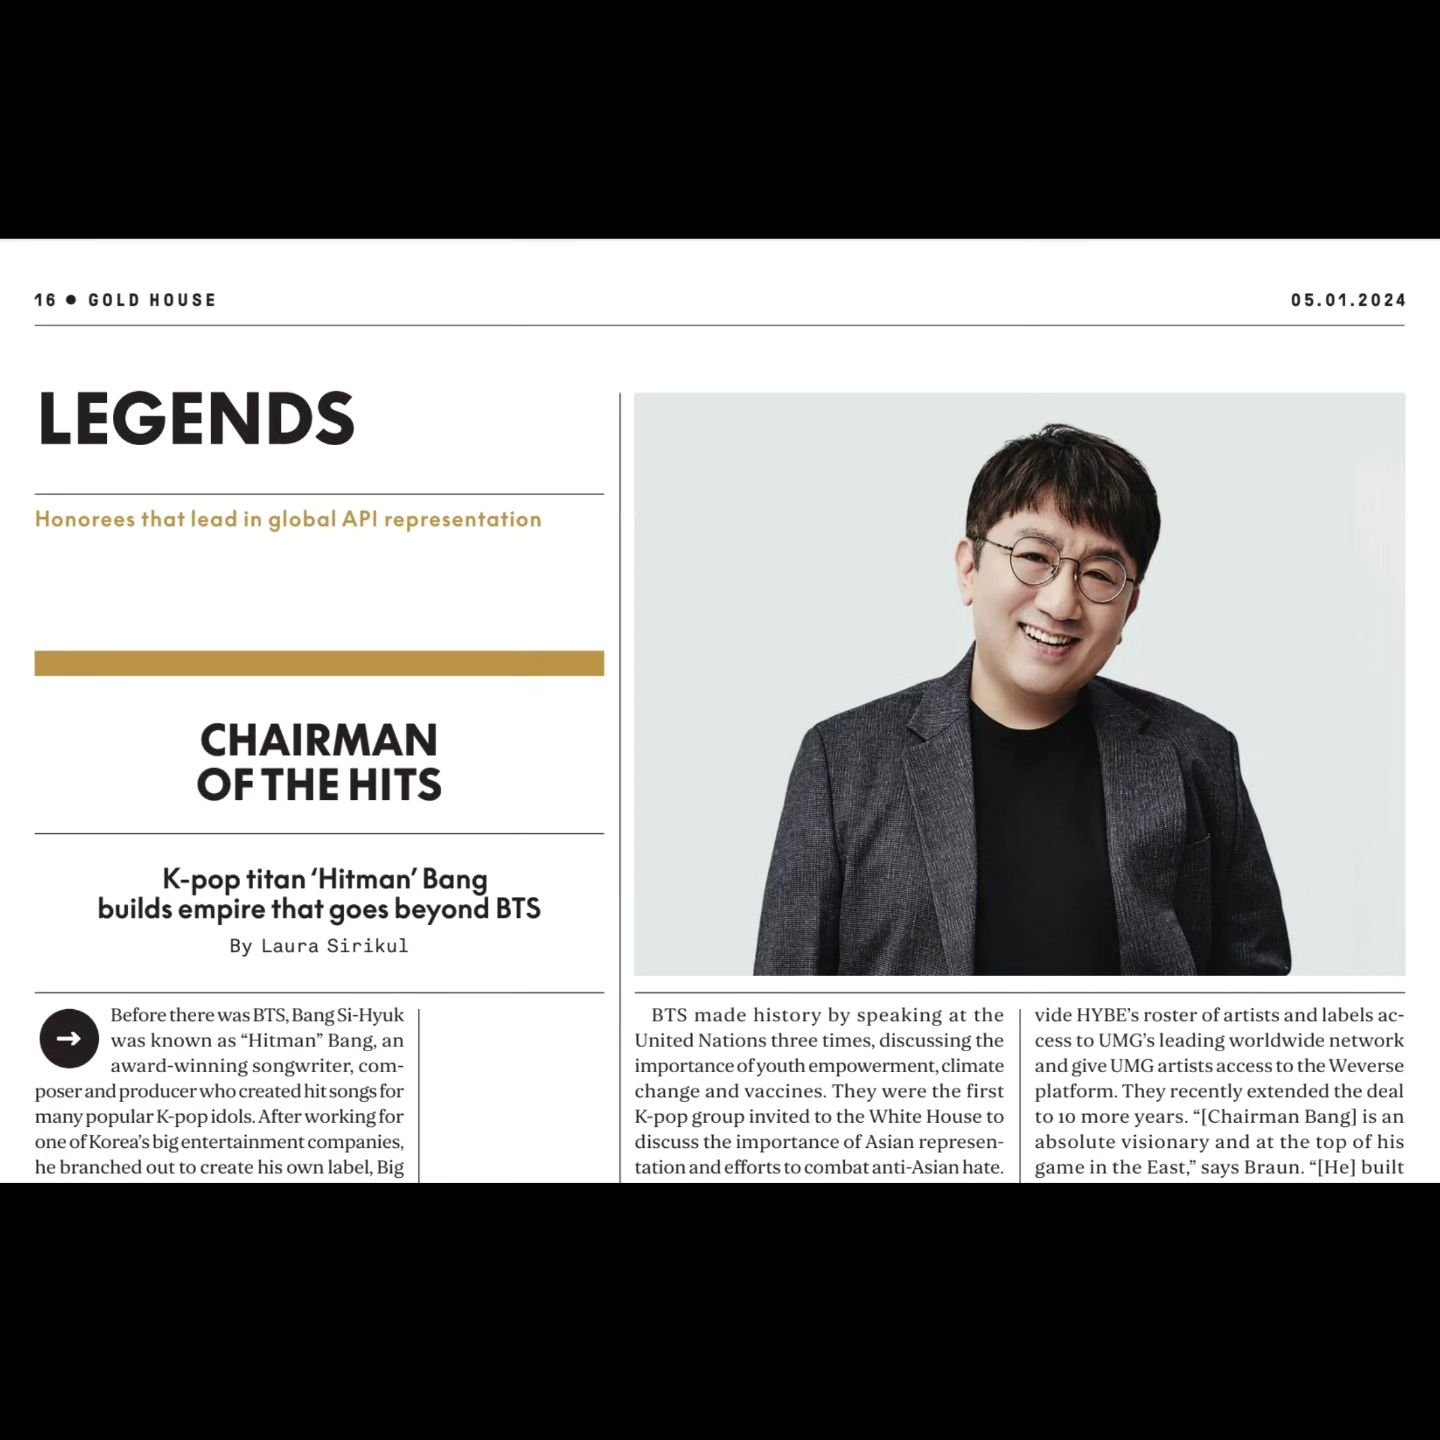 Back in March, I got a call from @jazzt21 one day asking me to contribute to the @Variety X @goldhouseco #API issue for Goldhouse's A100 List... 

She told me if I knew who Chairman Bang (or Bang PD) was?

I froze, and my mind went blank. I had to ha